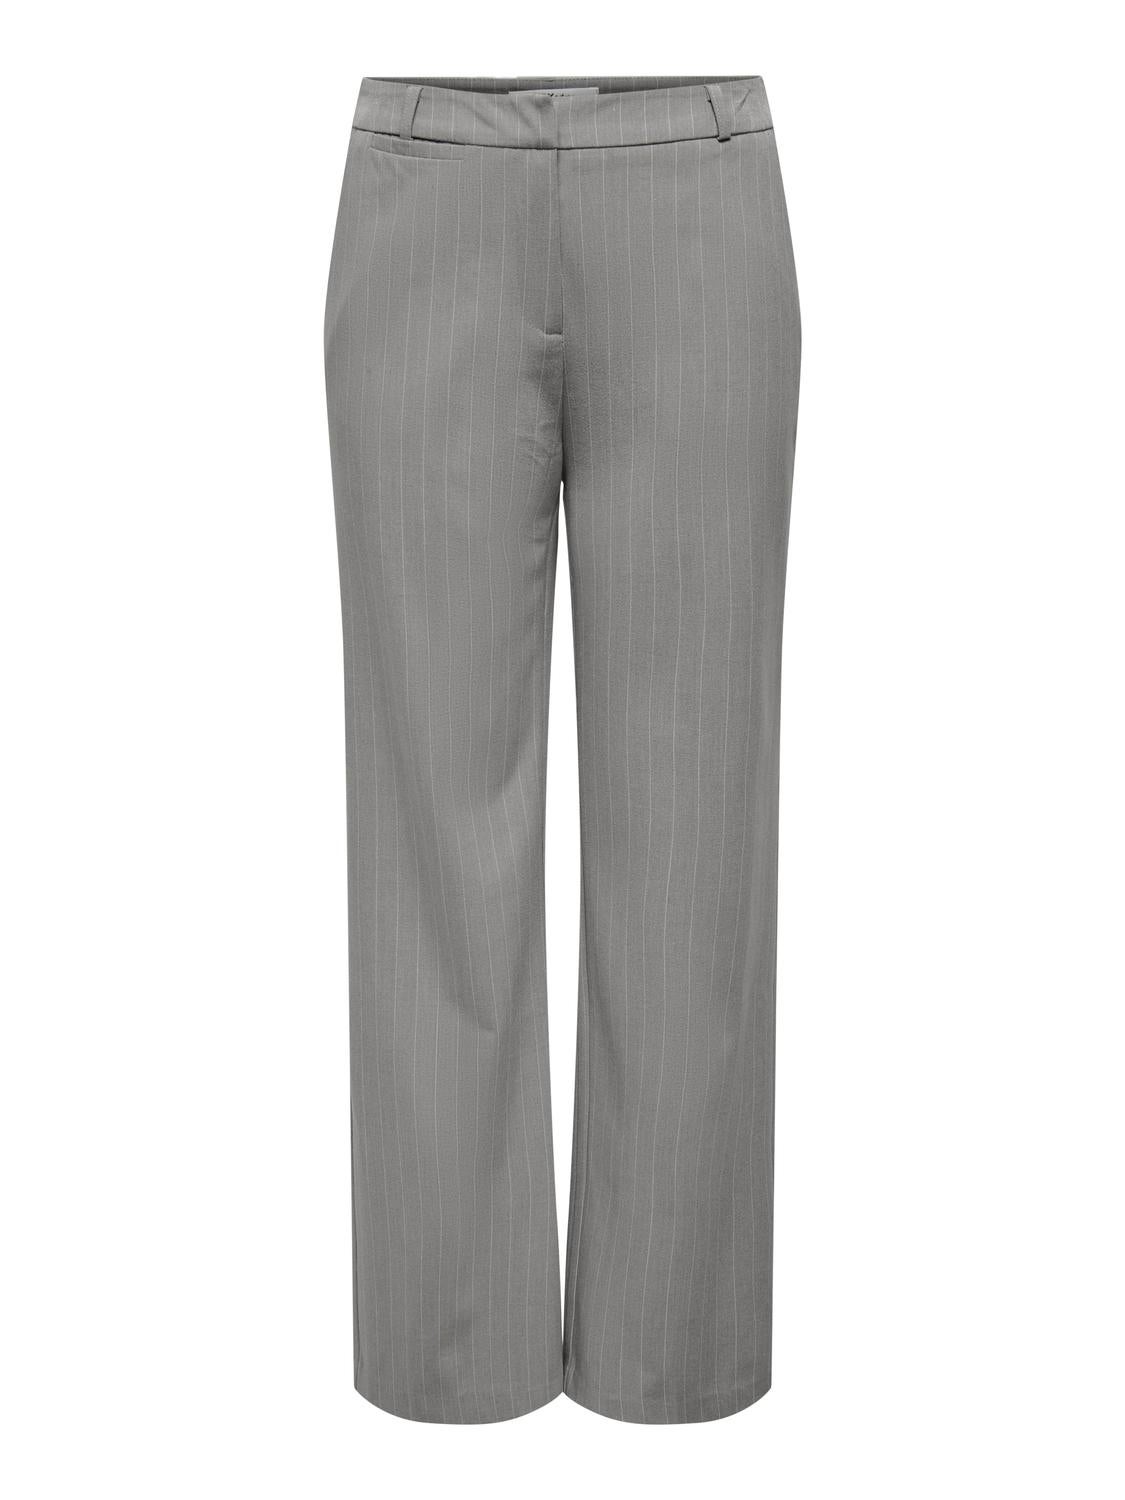 Striped classic pants | Medium Grey | ONLY®